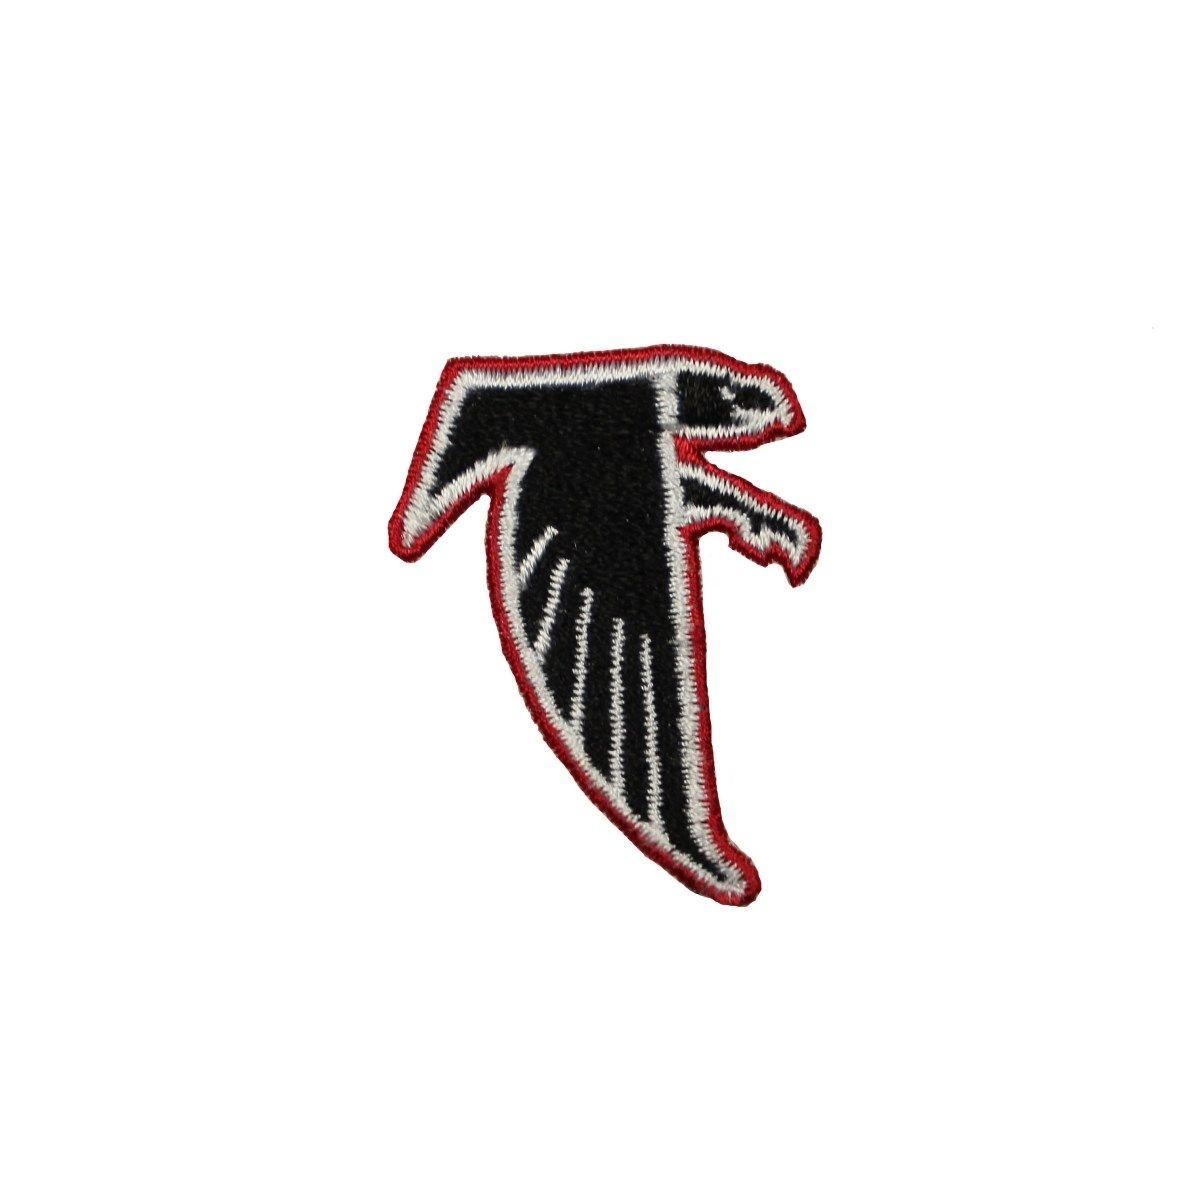 Falcon Team Logo - Lot of 4 Atlanta Falcons Old Team Logo Patch Crest Embroidered Iron